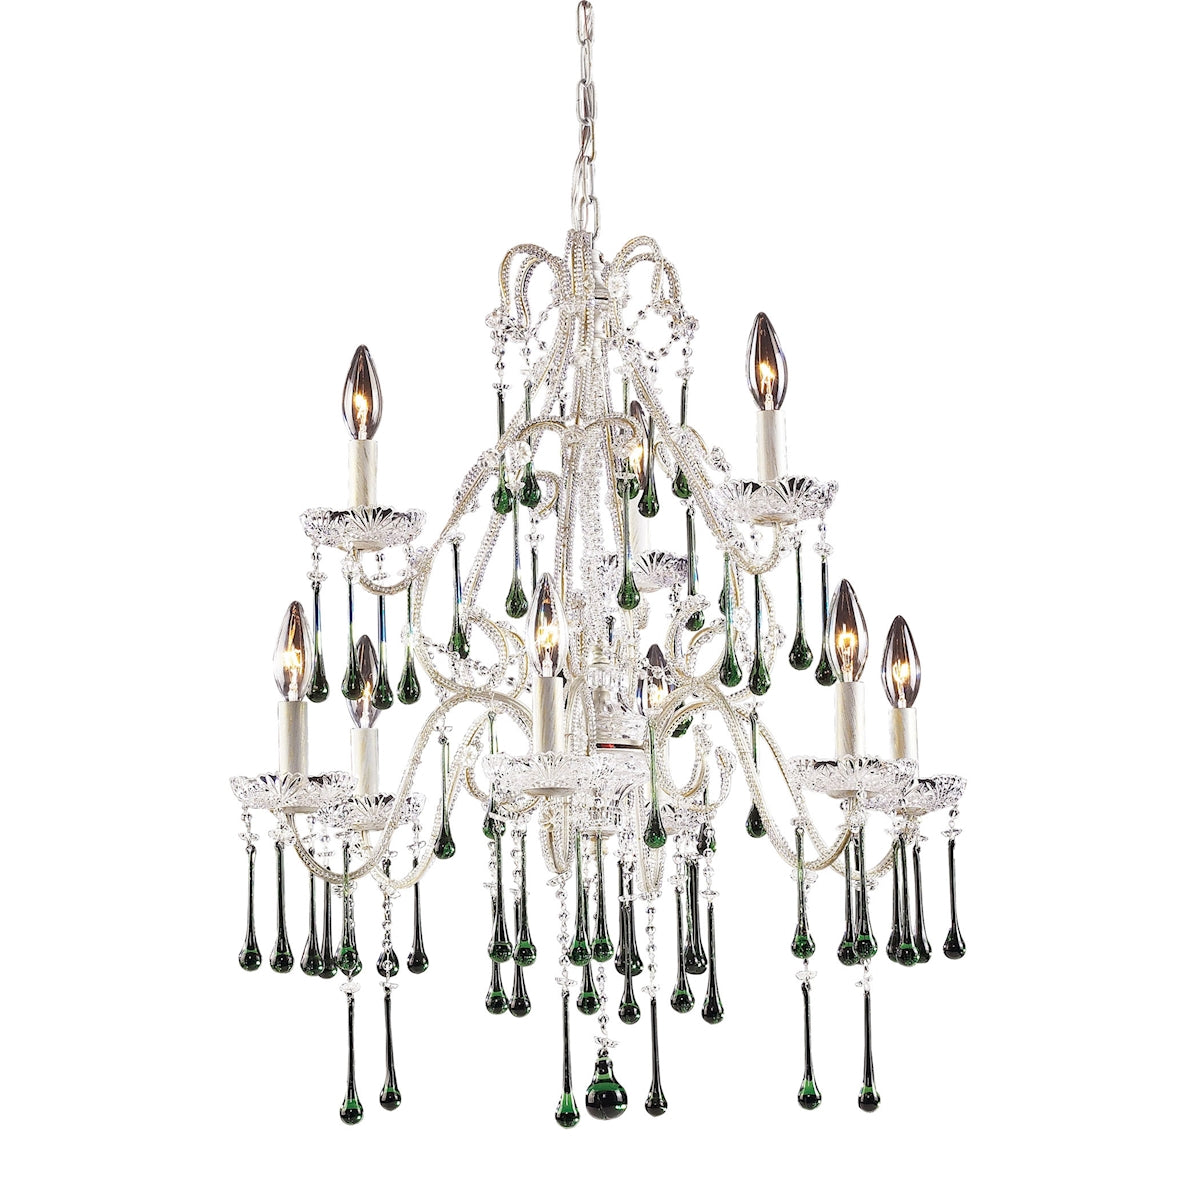 ELK Lighting 4003/6+3LM Opulence 9-Light Chandelier in Antique White with Lime Crystals